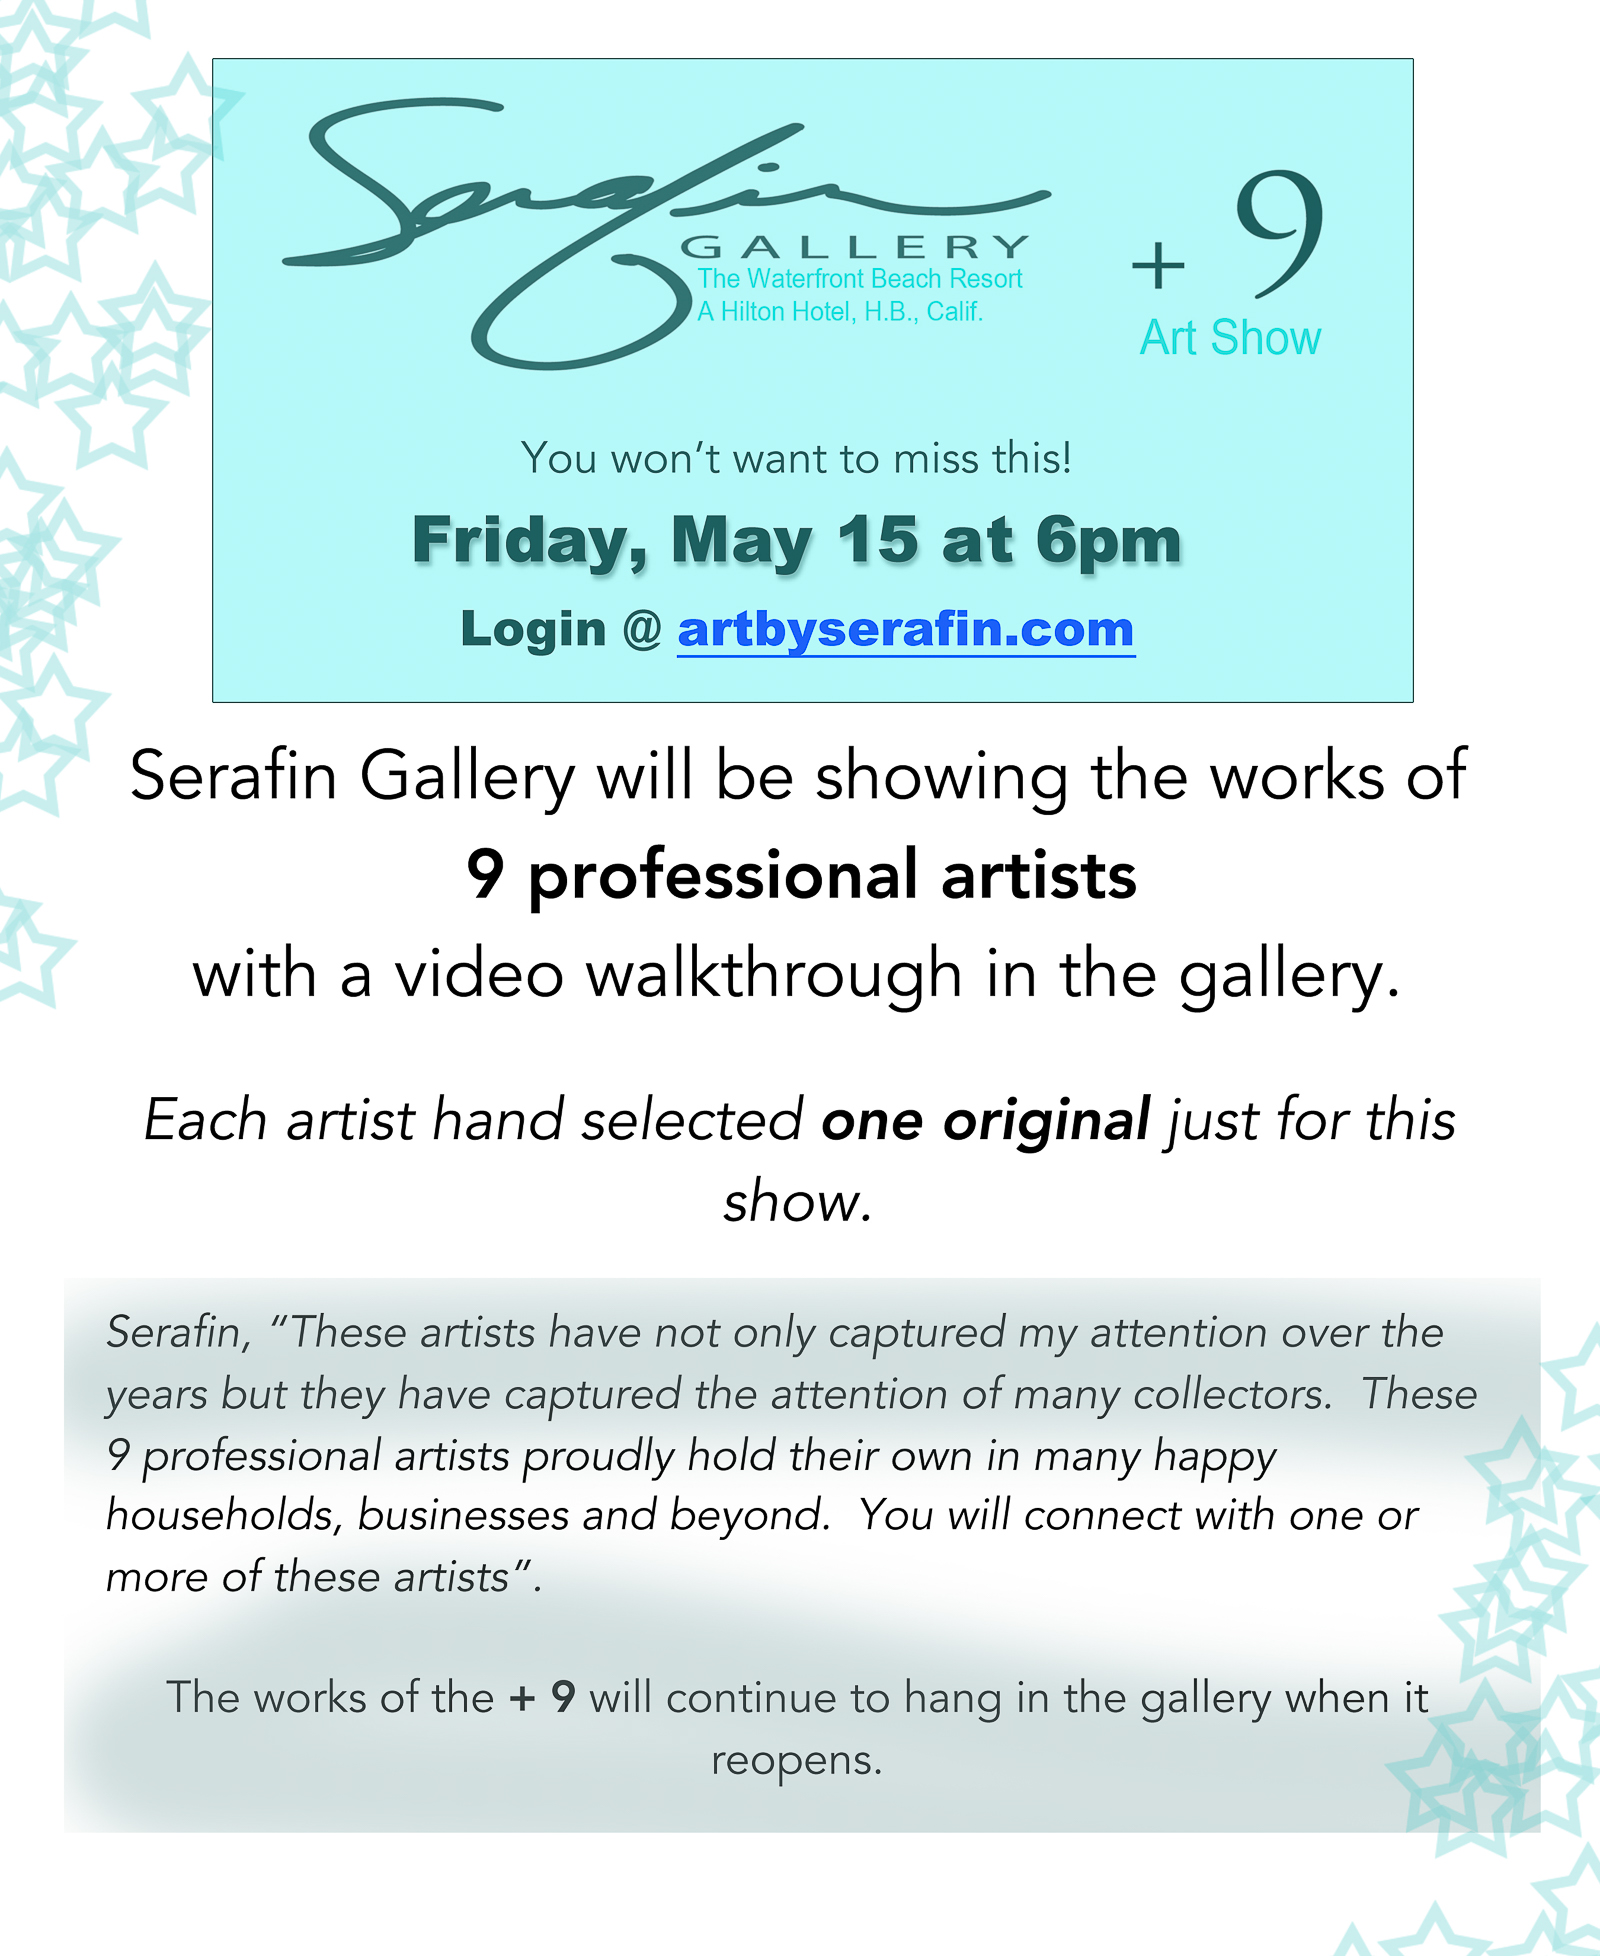 Serafin gallery online art show on may 15th 2020 at 6pm